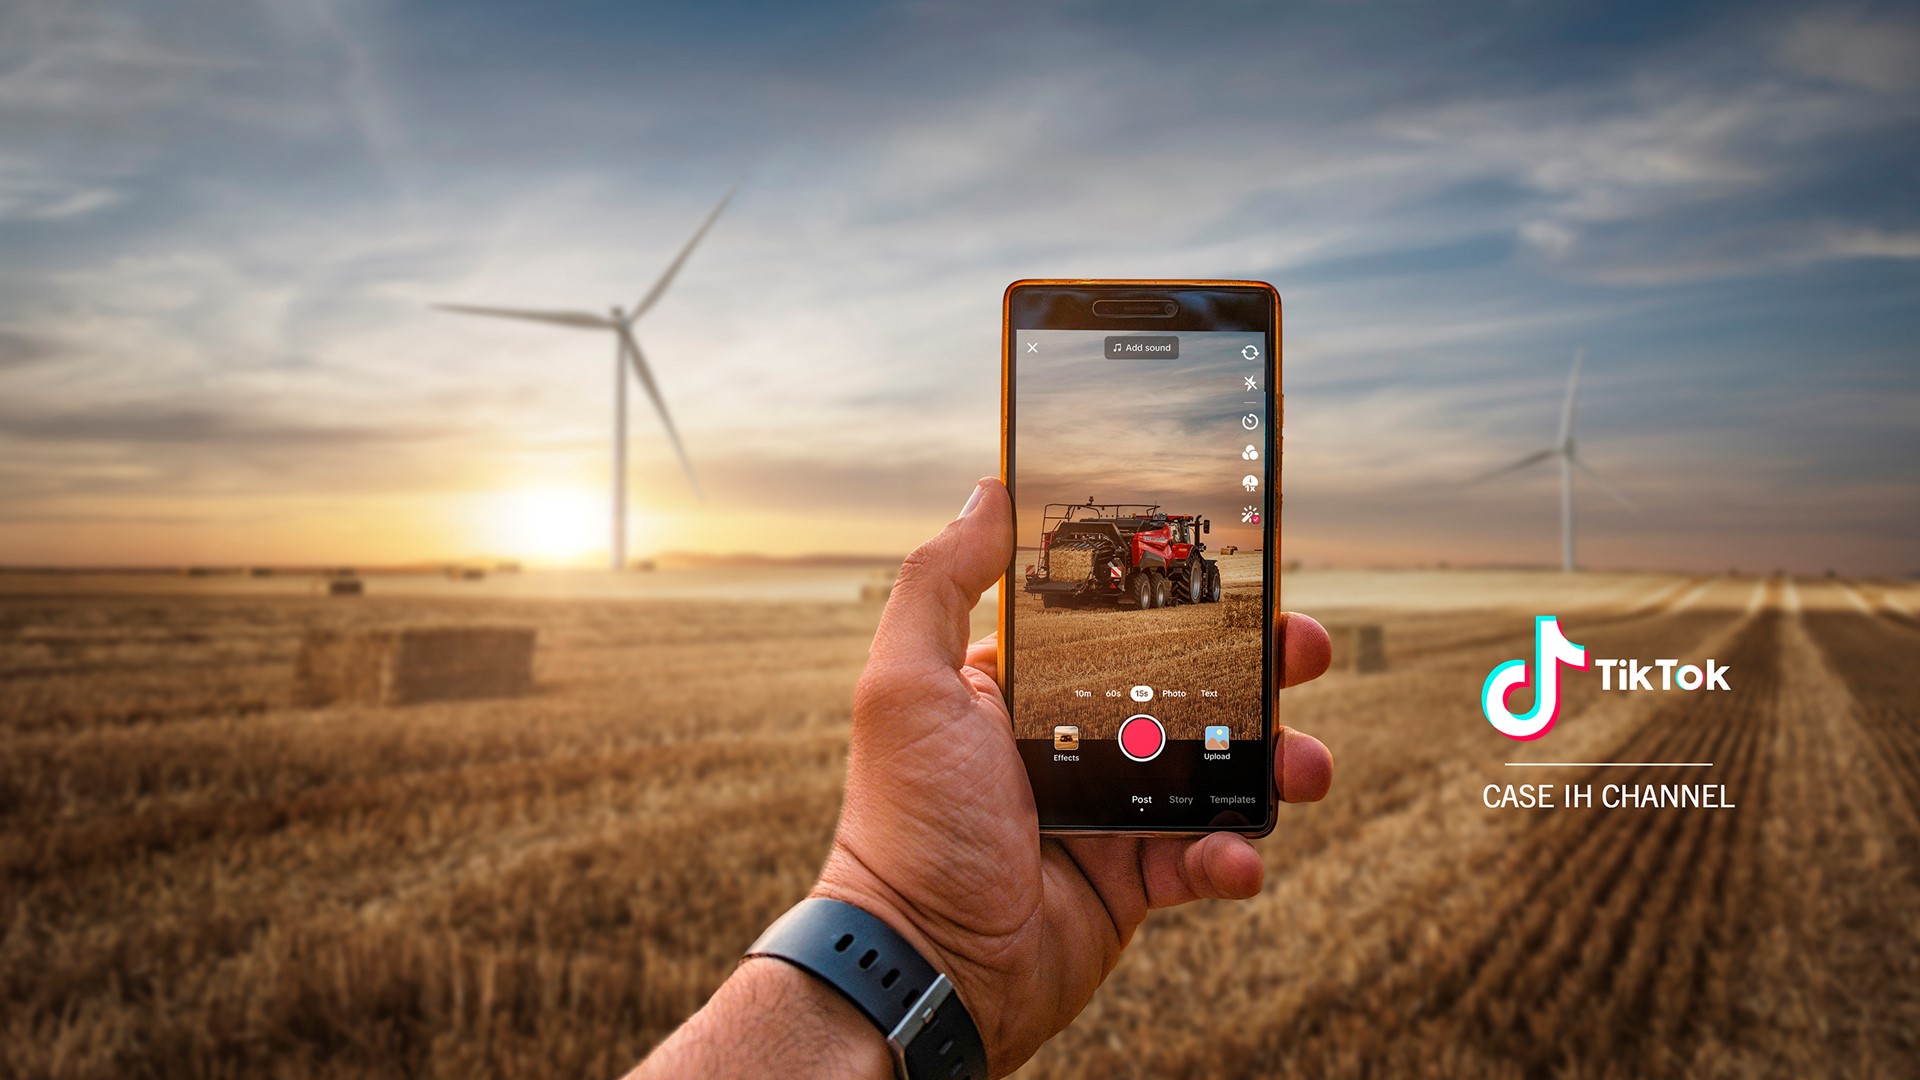 new-case-ih-tiktok-channel-reaches-young-farmers